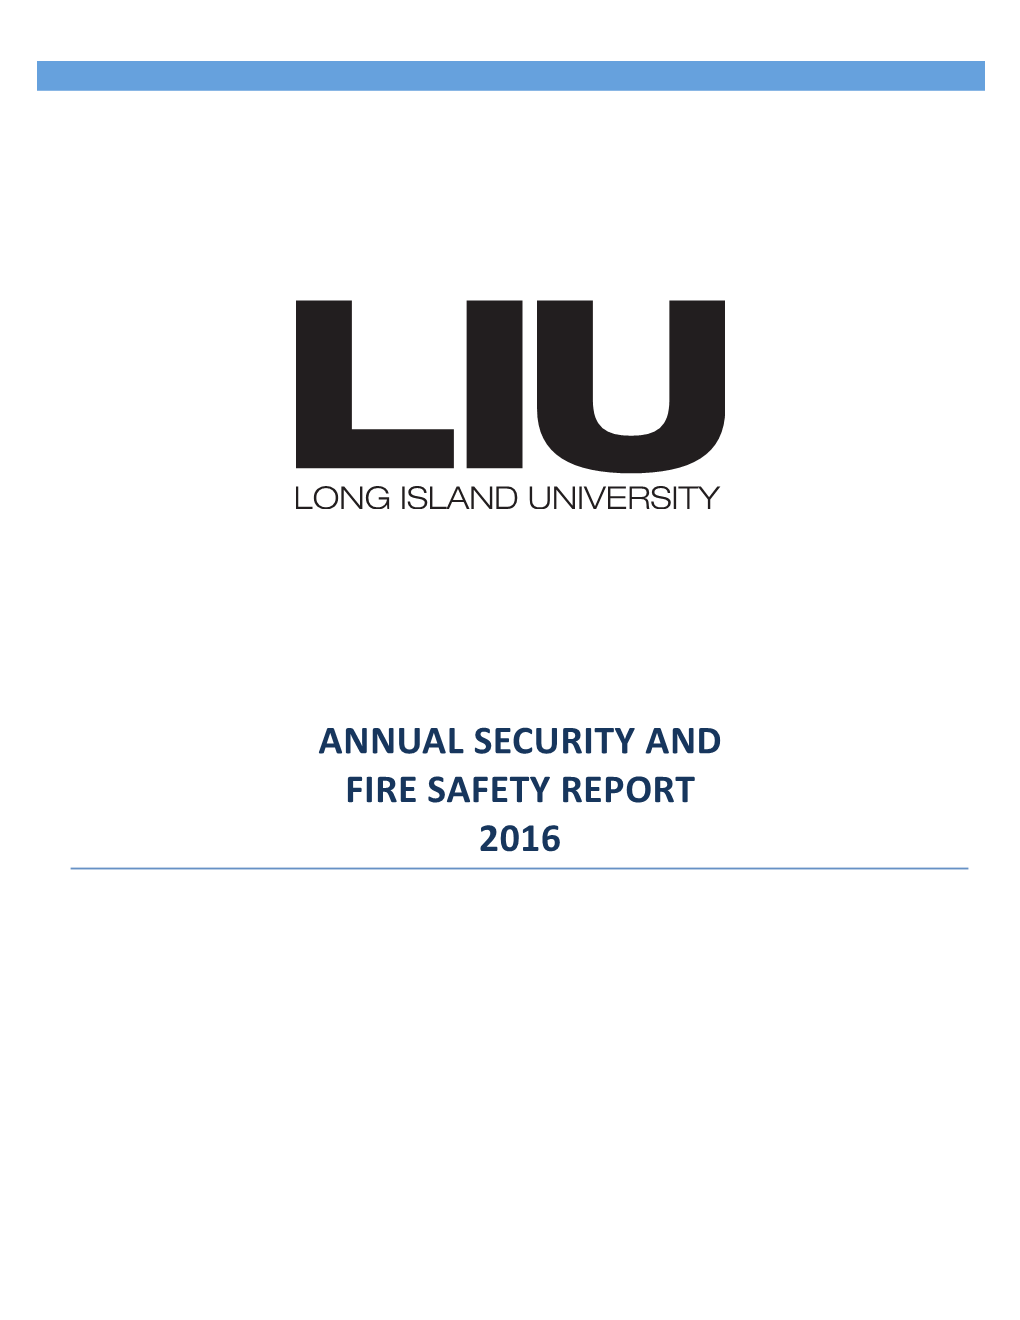 Annual Security and Fire Safety Report 2016